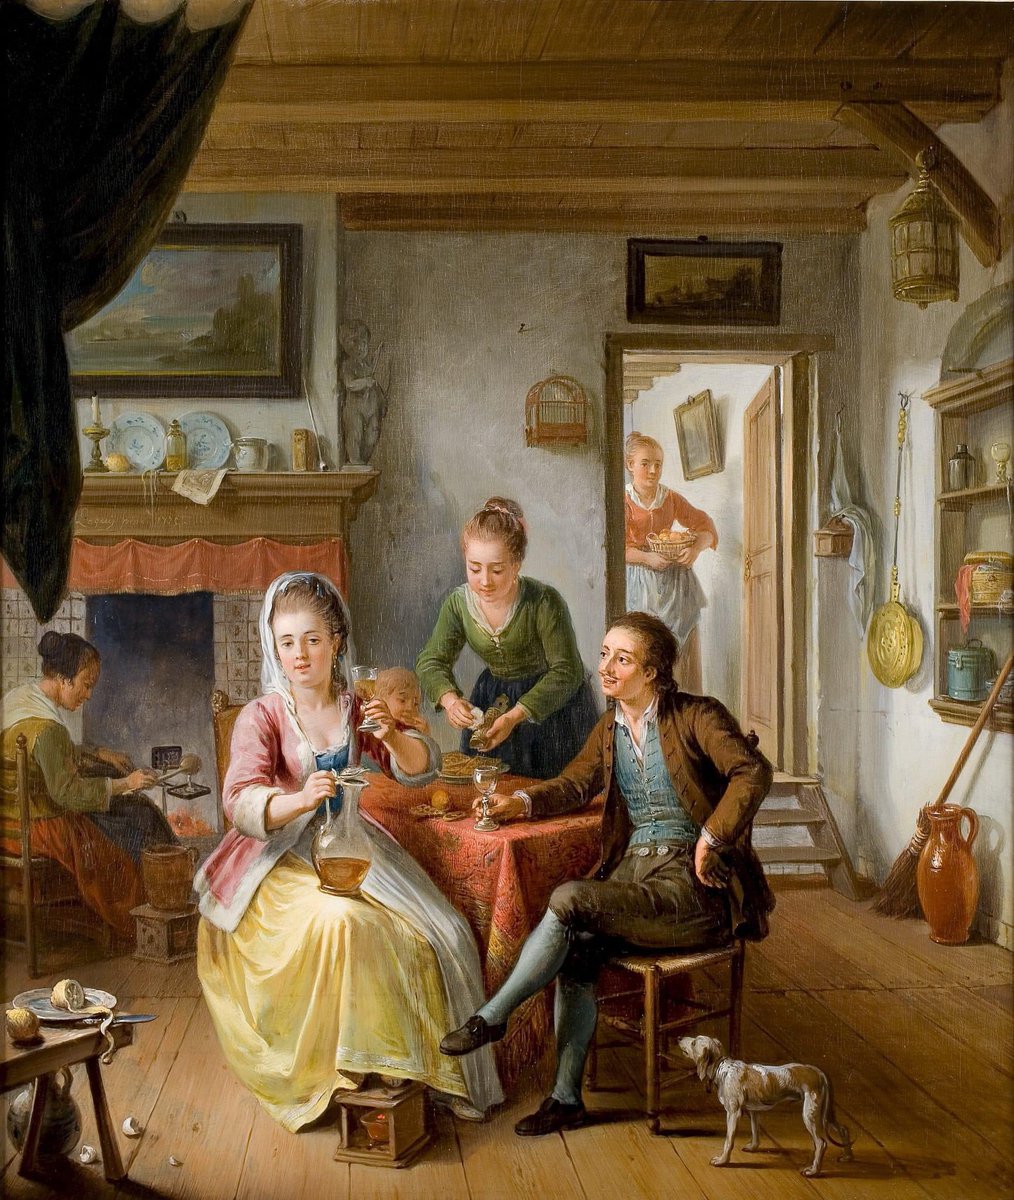 WILLIEM JOSEPH LAQUY was born in Brühl in 1773 and died in 1798 in Cléves He was an 18th century draftsman and artist of German origin. He practiced in Amsterdam . Household painting Made of oil on canvas . Size : height :58.5cm(23in) ;width:50.5cm (19.8in)